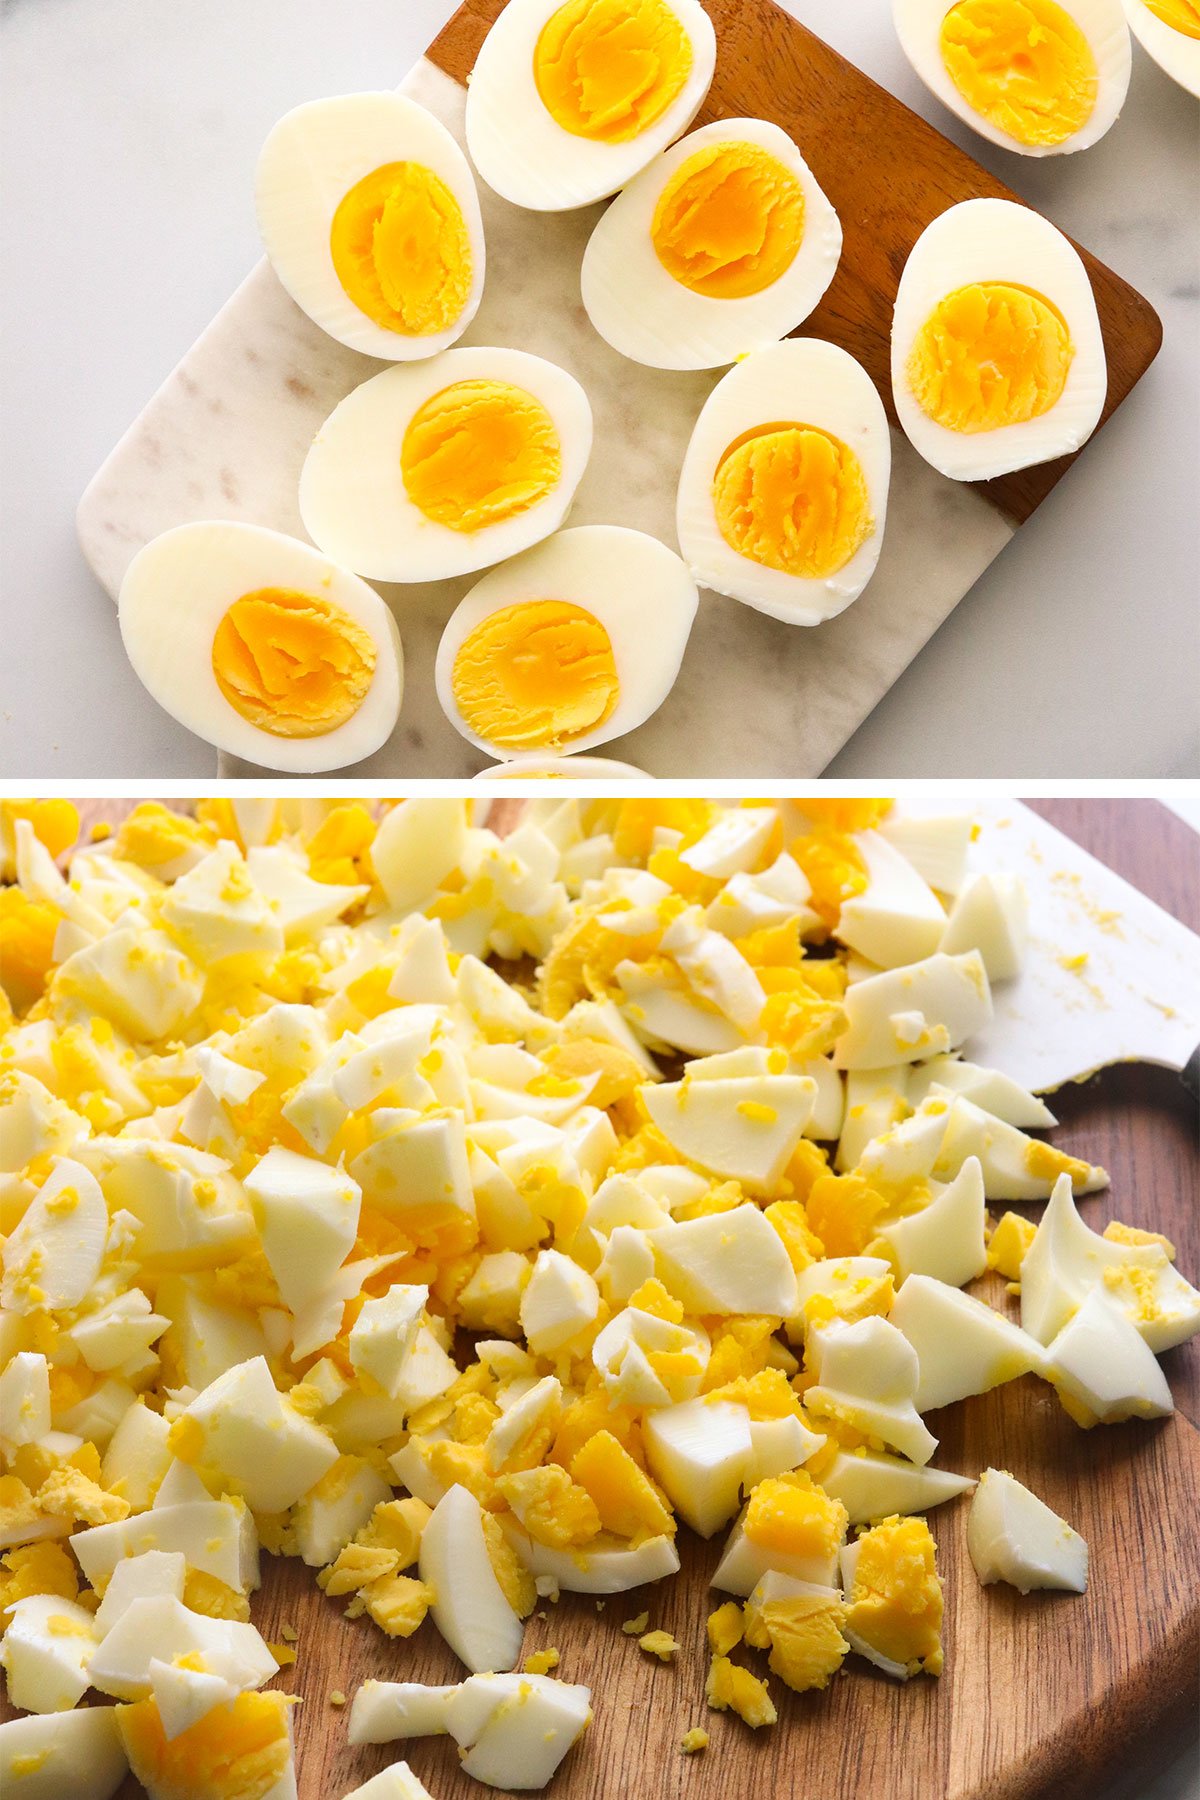 hard boiled eggs sliced in half and then chopped for the salad.